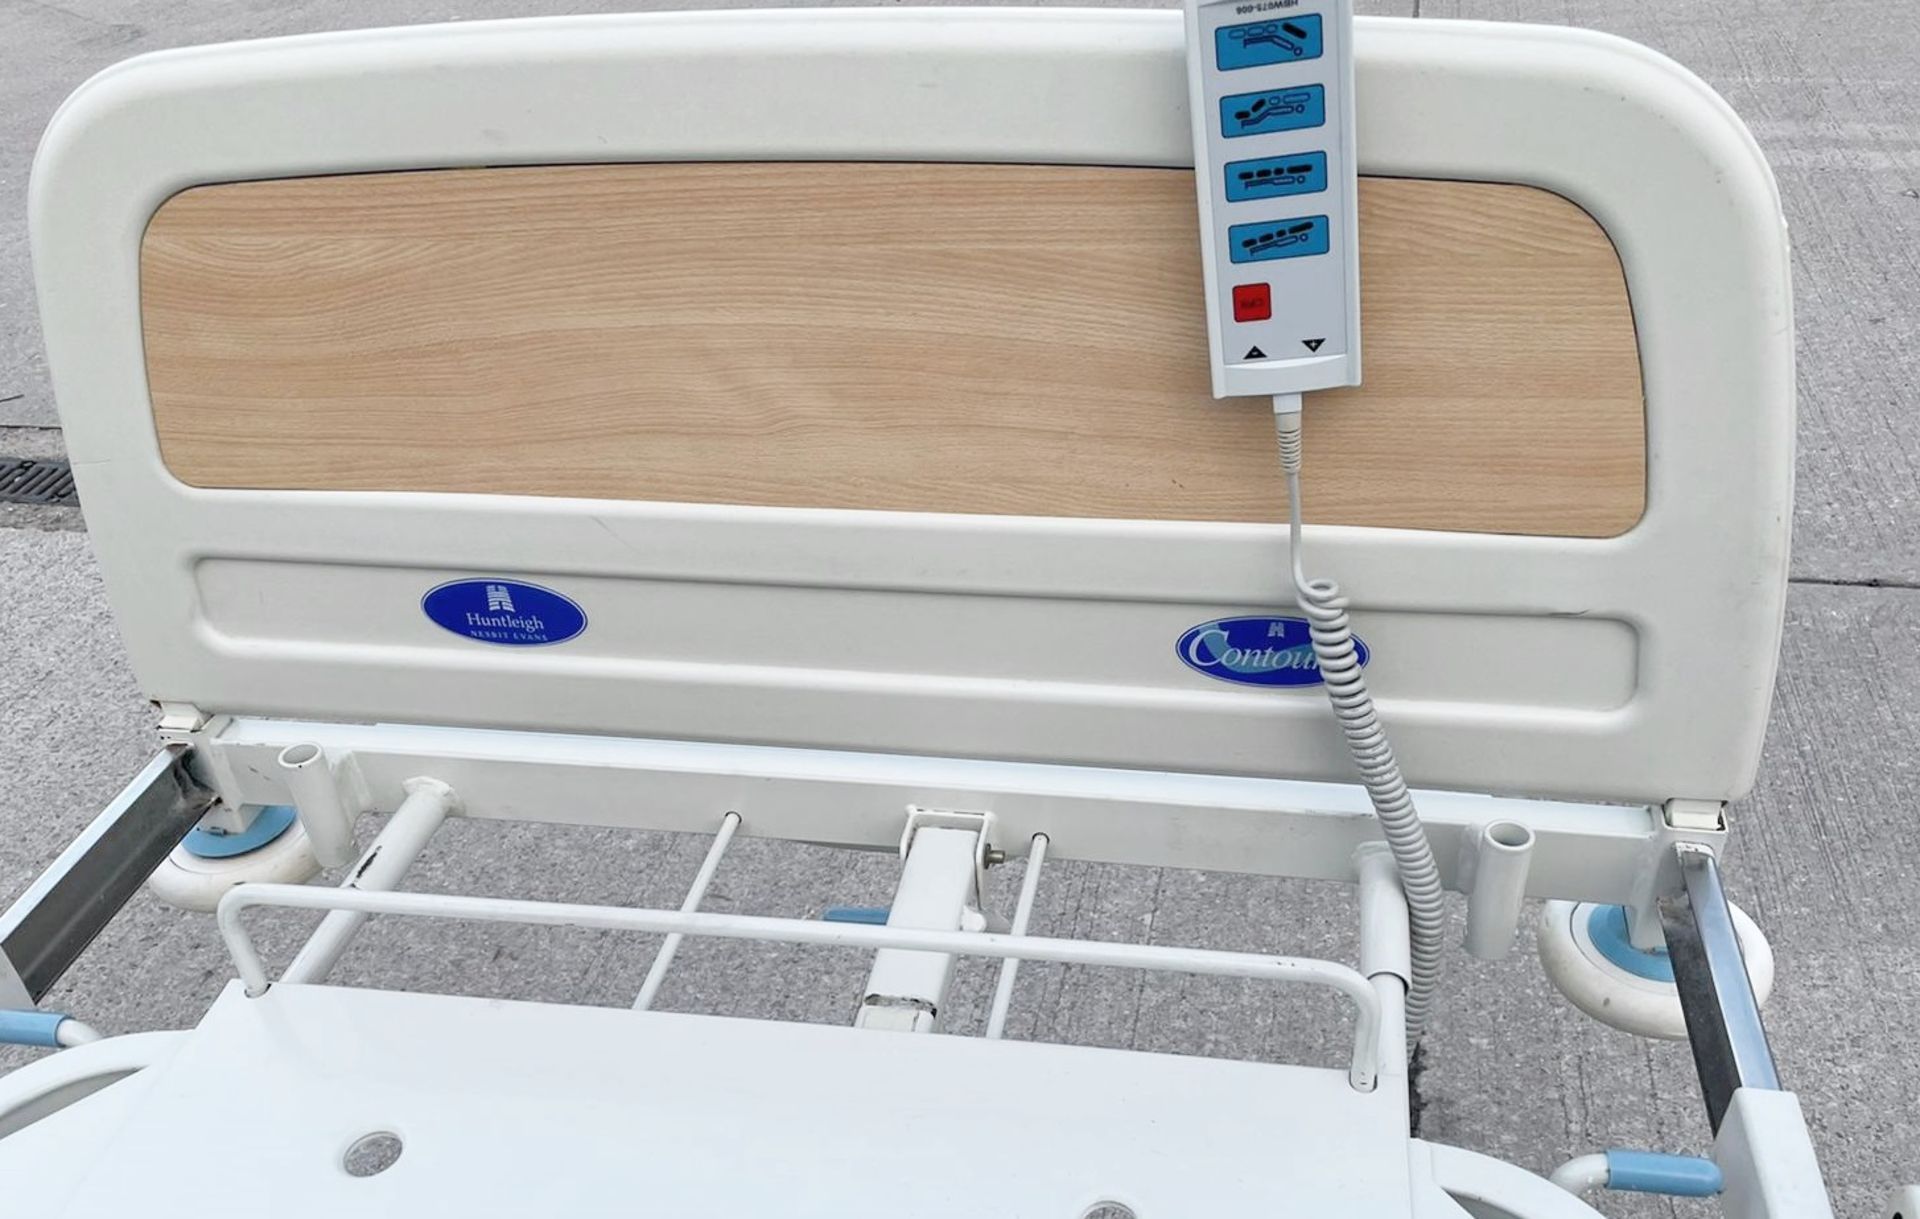 1 x Huntleigh CONTOURA Electric Hospital Bed - Features Rise/Fall 3-Way Profiling, Side Rails, - Image 10 of 16